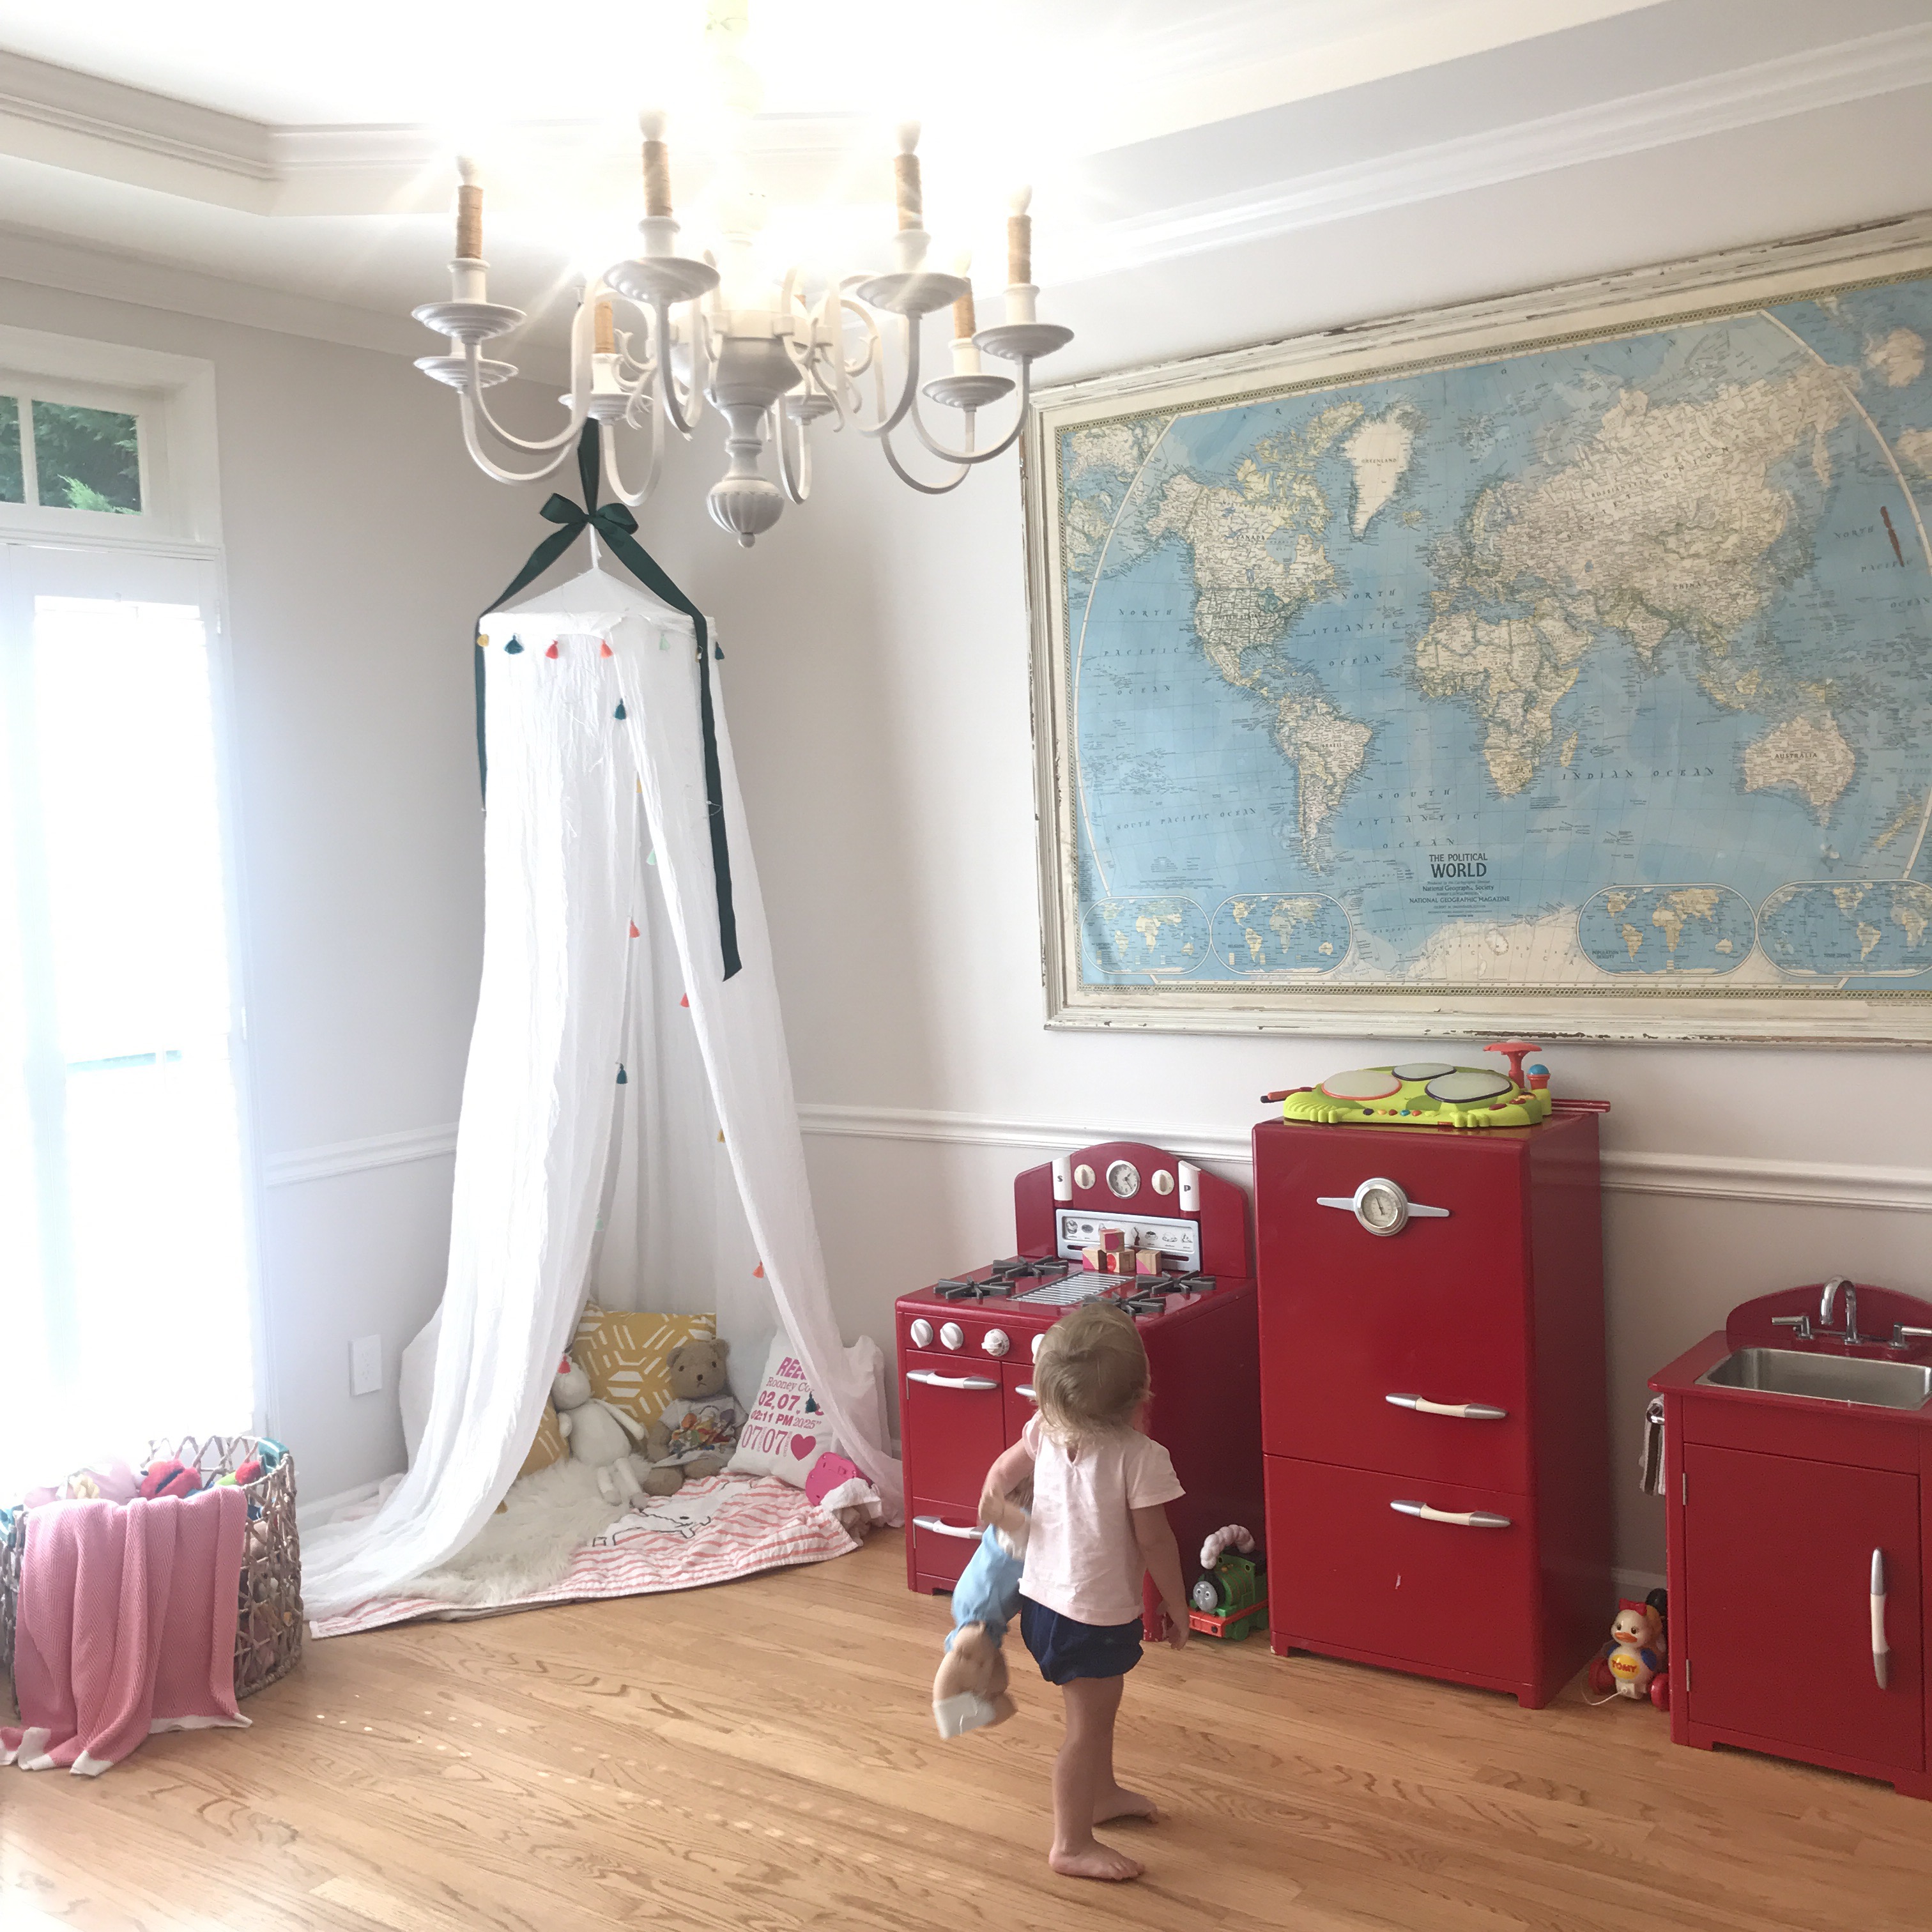 Our Playroom DIY Makeover!